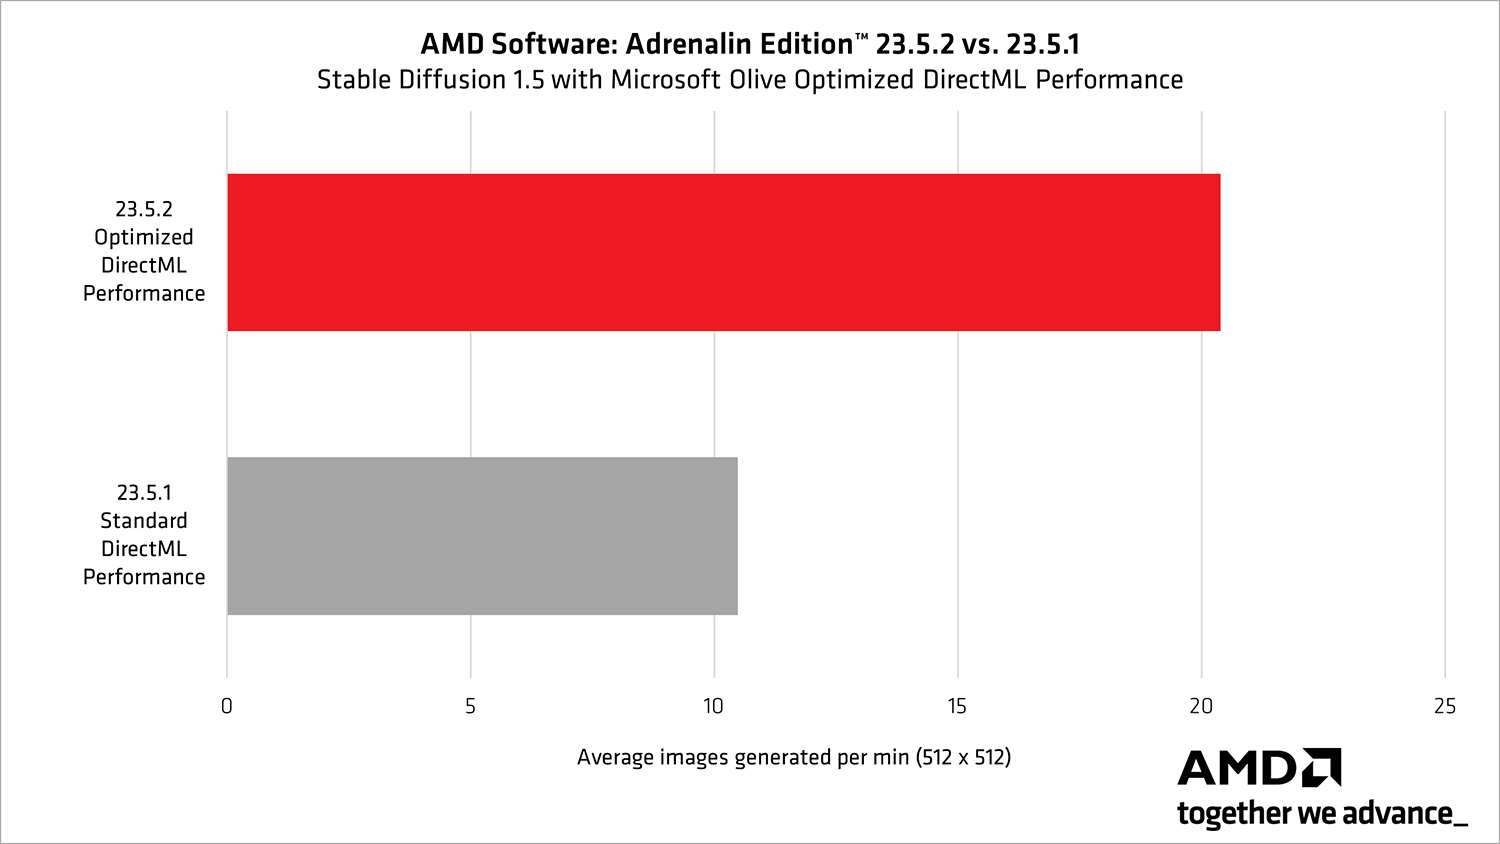 AMD support for Microsoft® DirectML optimization of Stable Diffusion